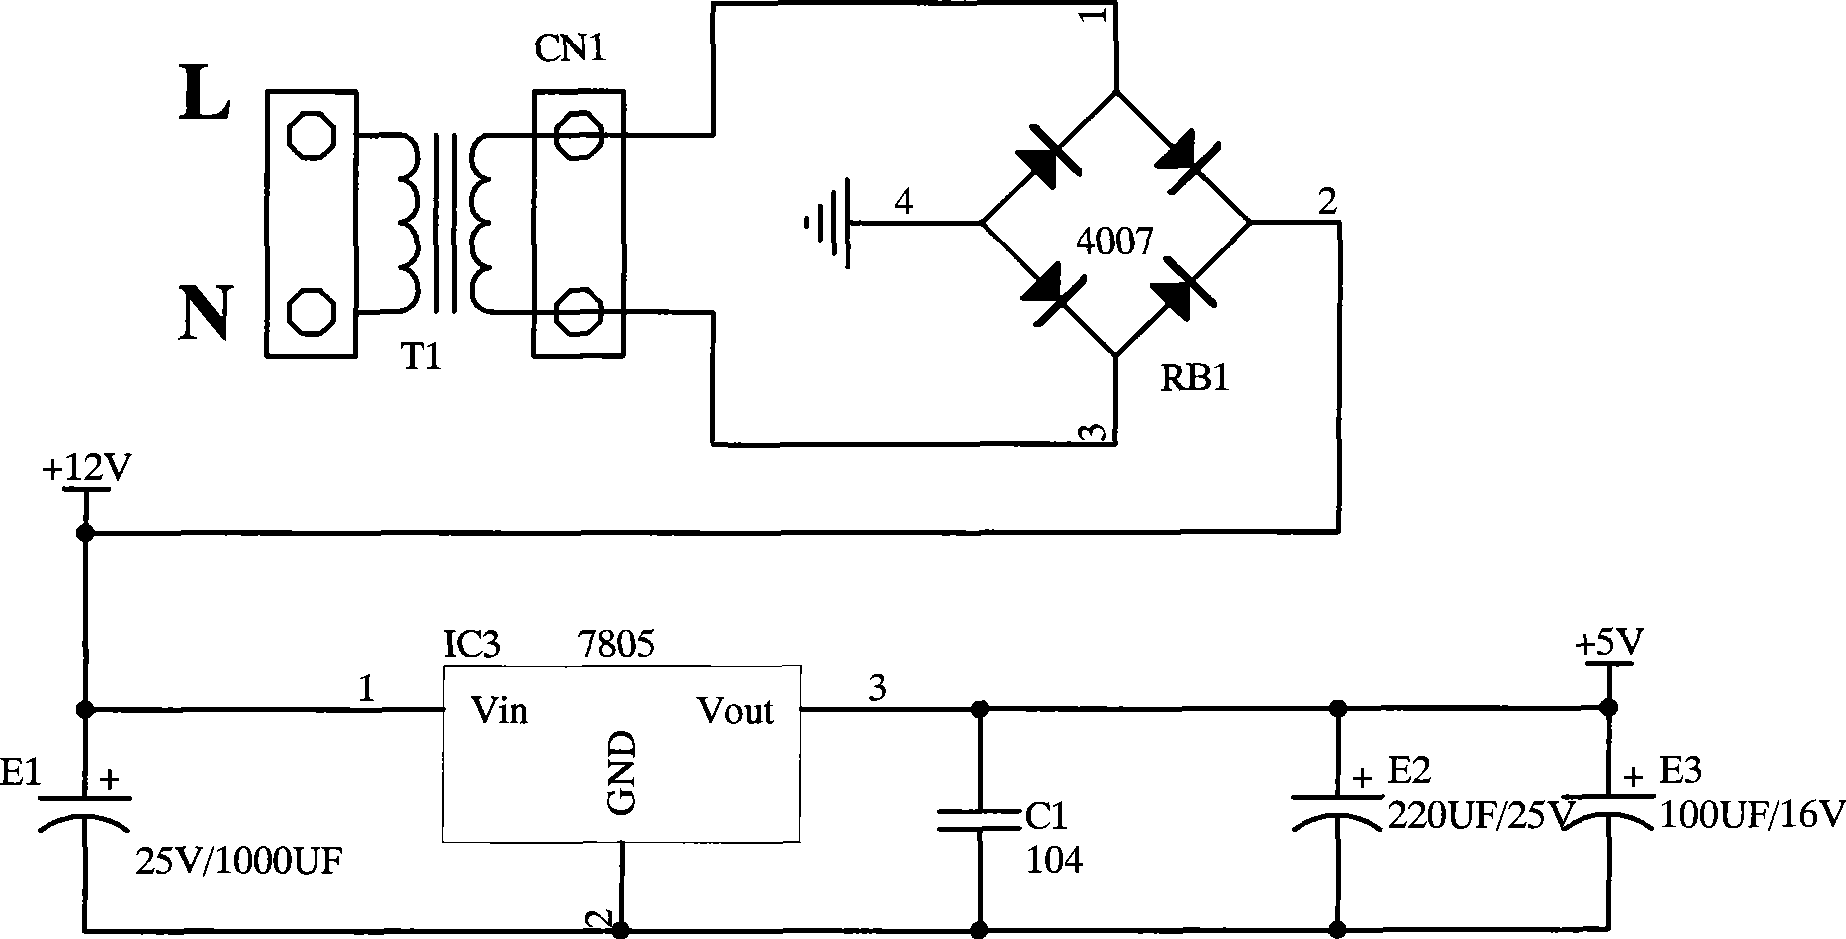 Transmission code detection device for remote controller